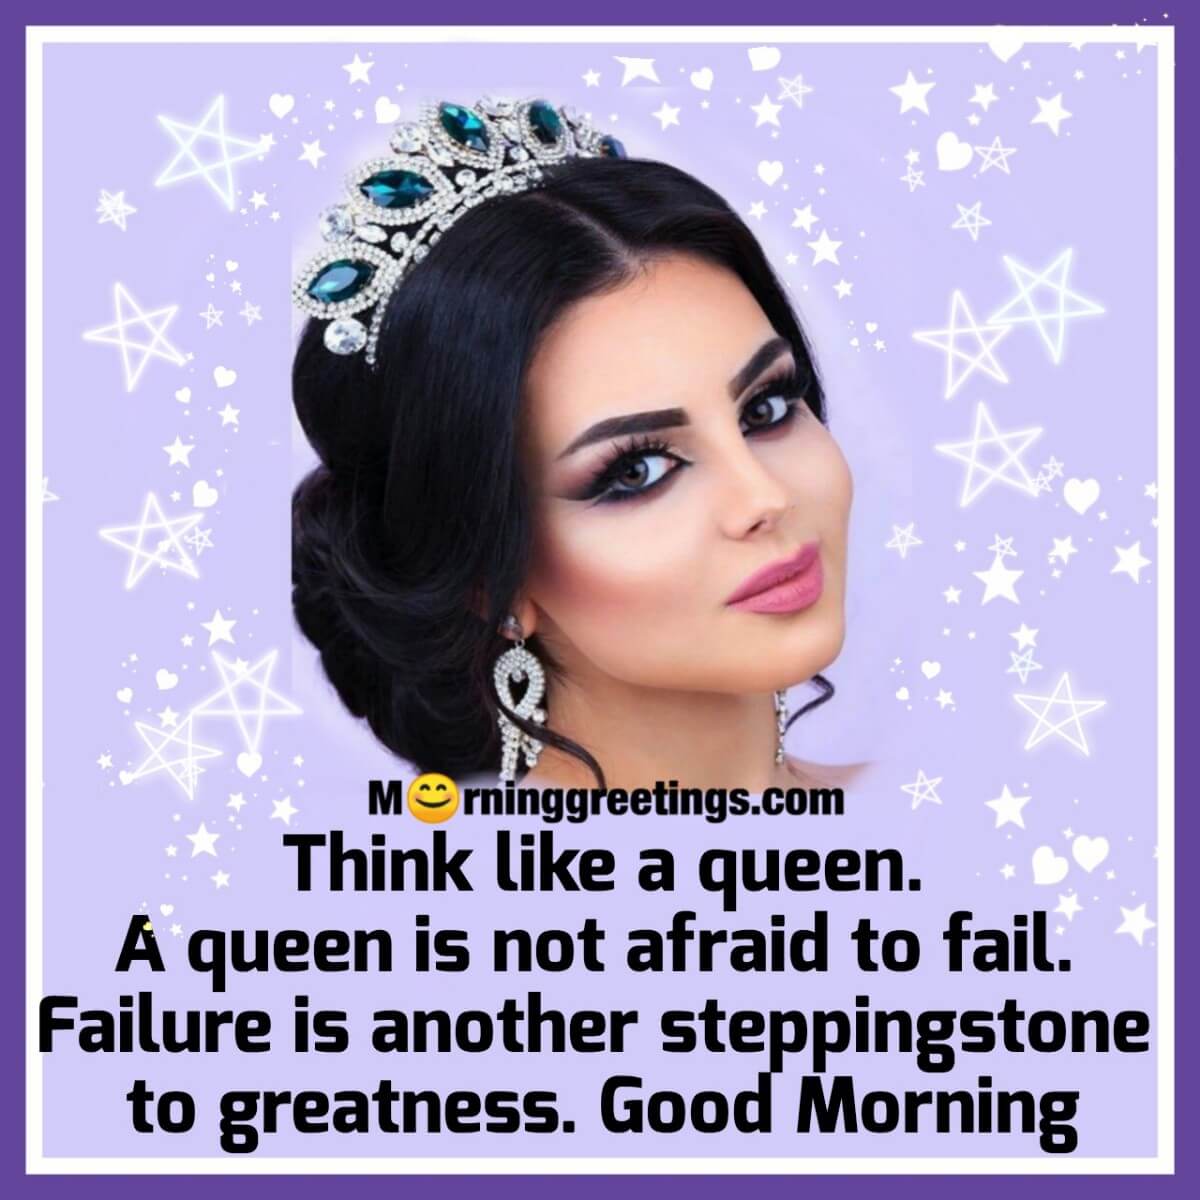 Good Morning Quote For Woman On Queen